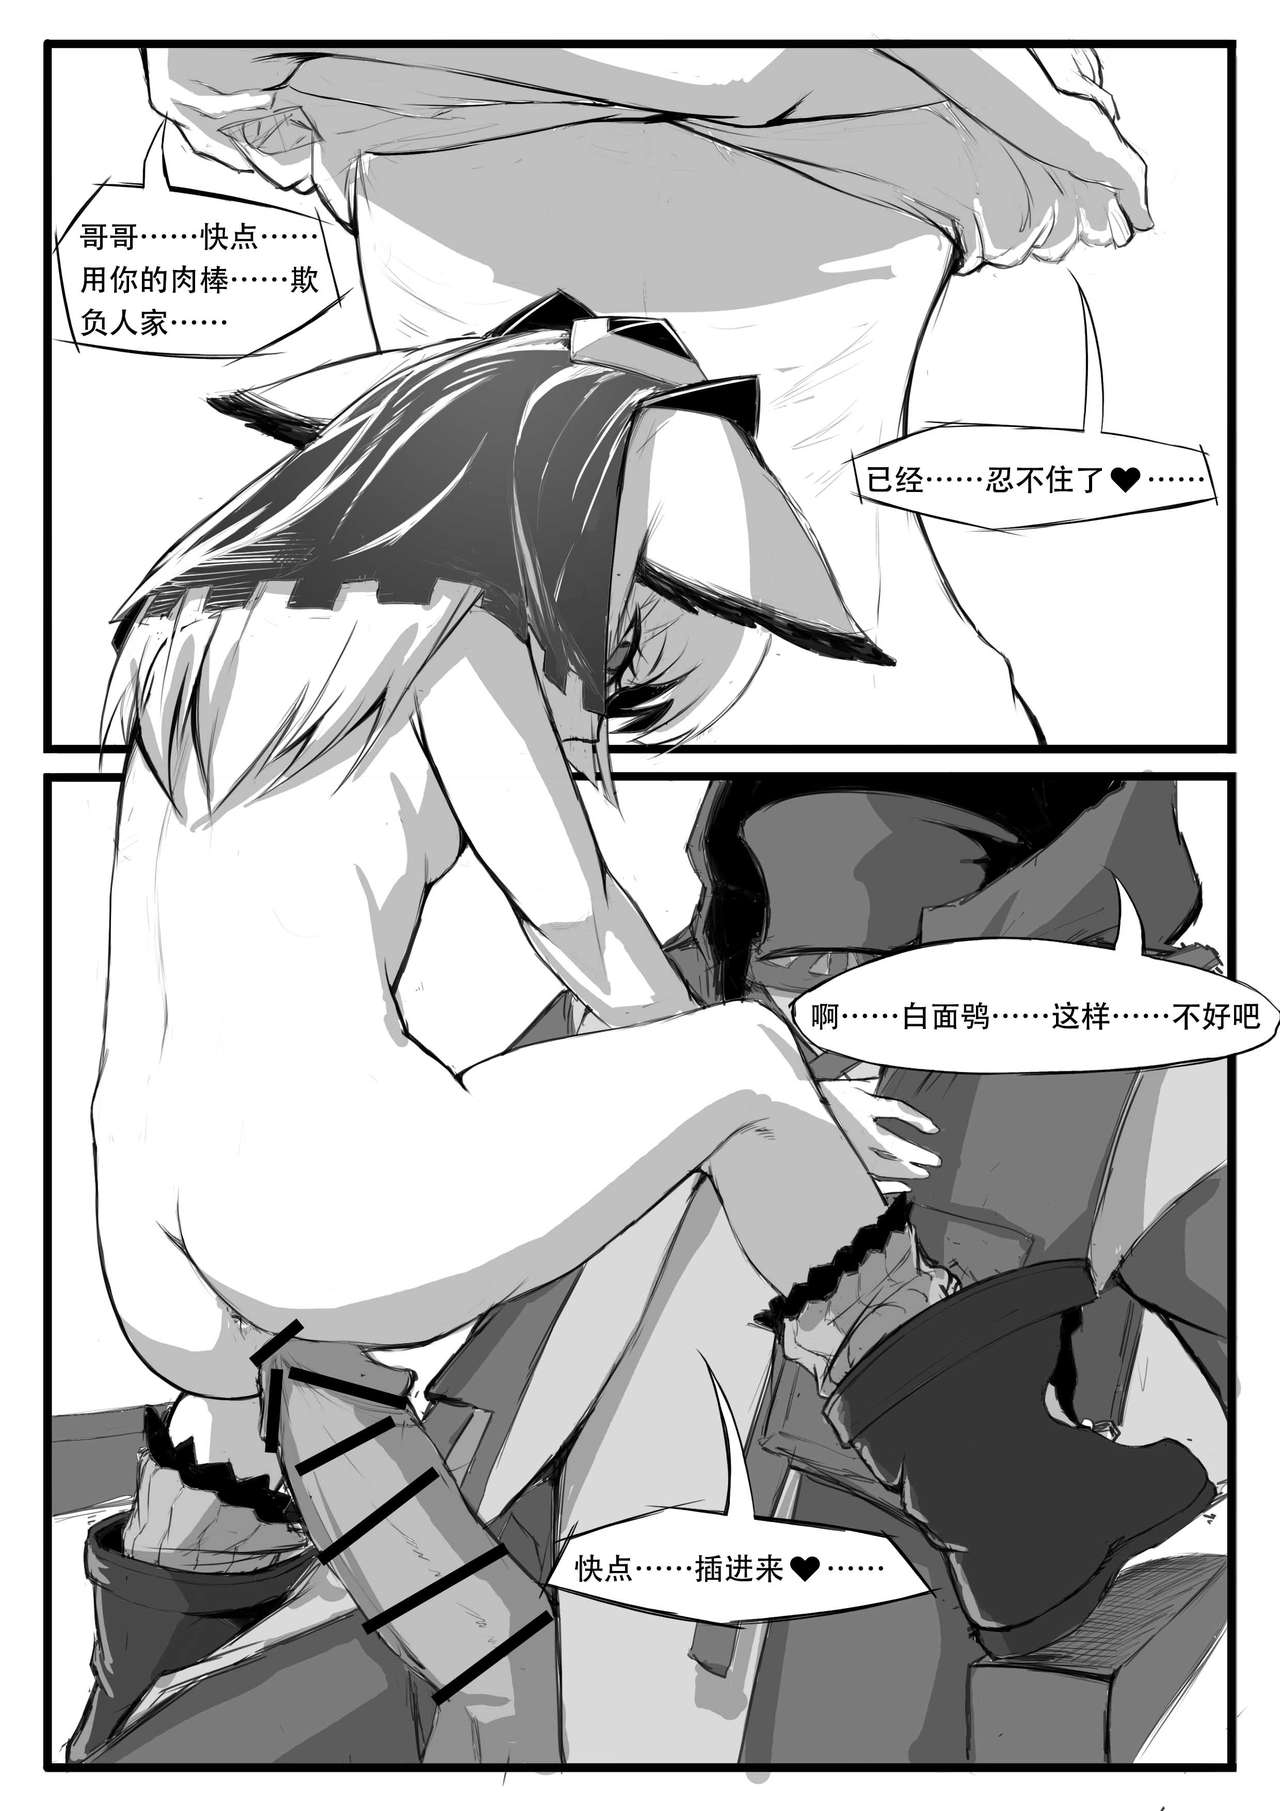 [saluky] 关于白面鸮变成了幼女这件事 (Arknights) [Chinese] page 18 full